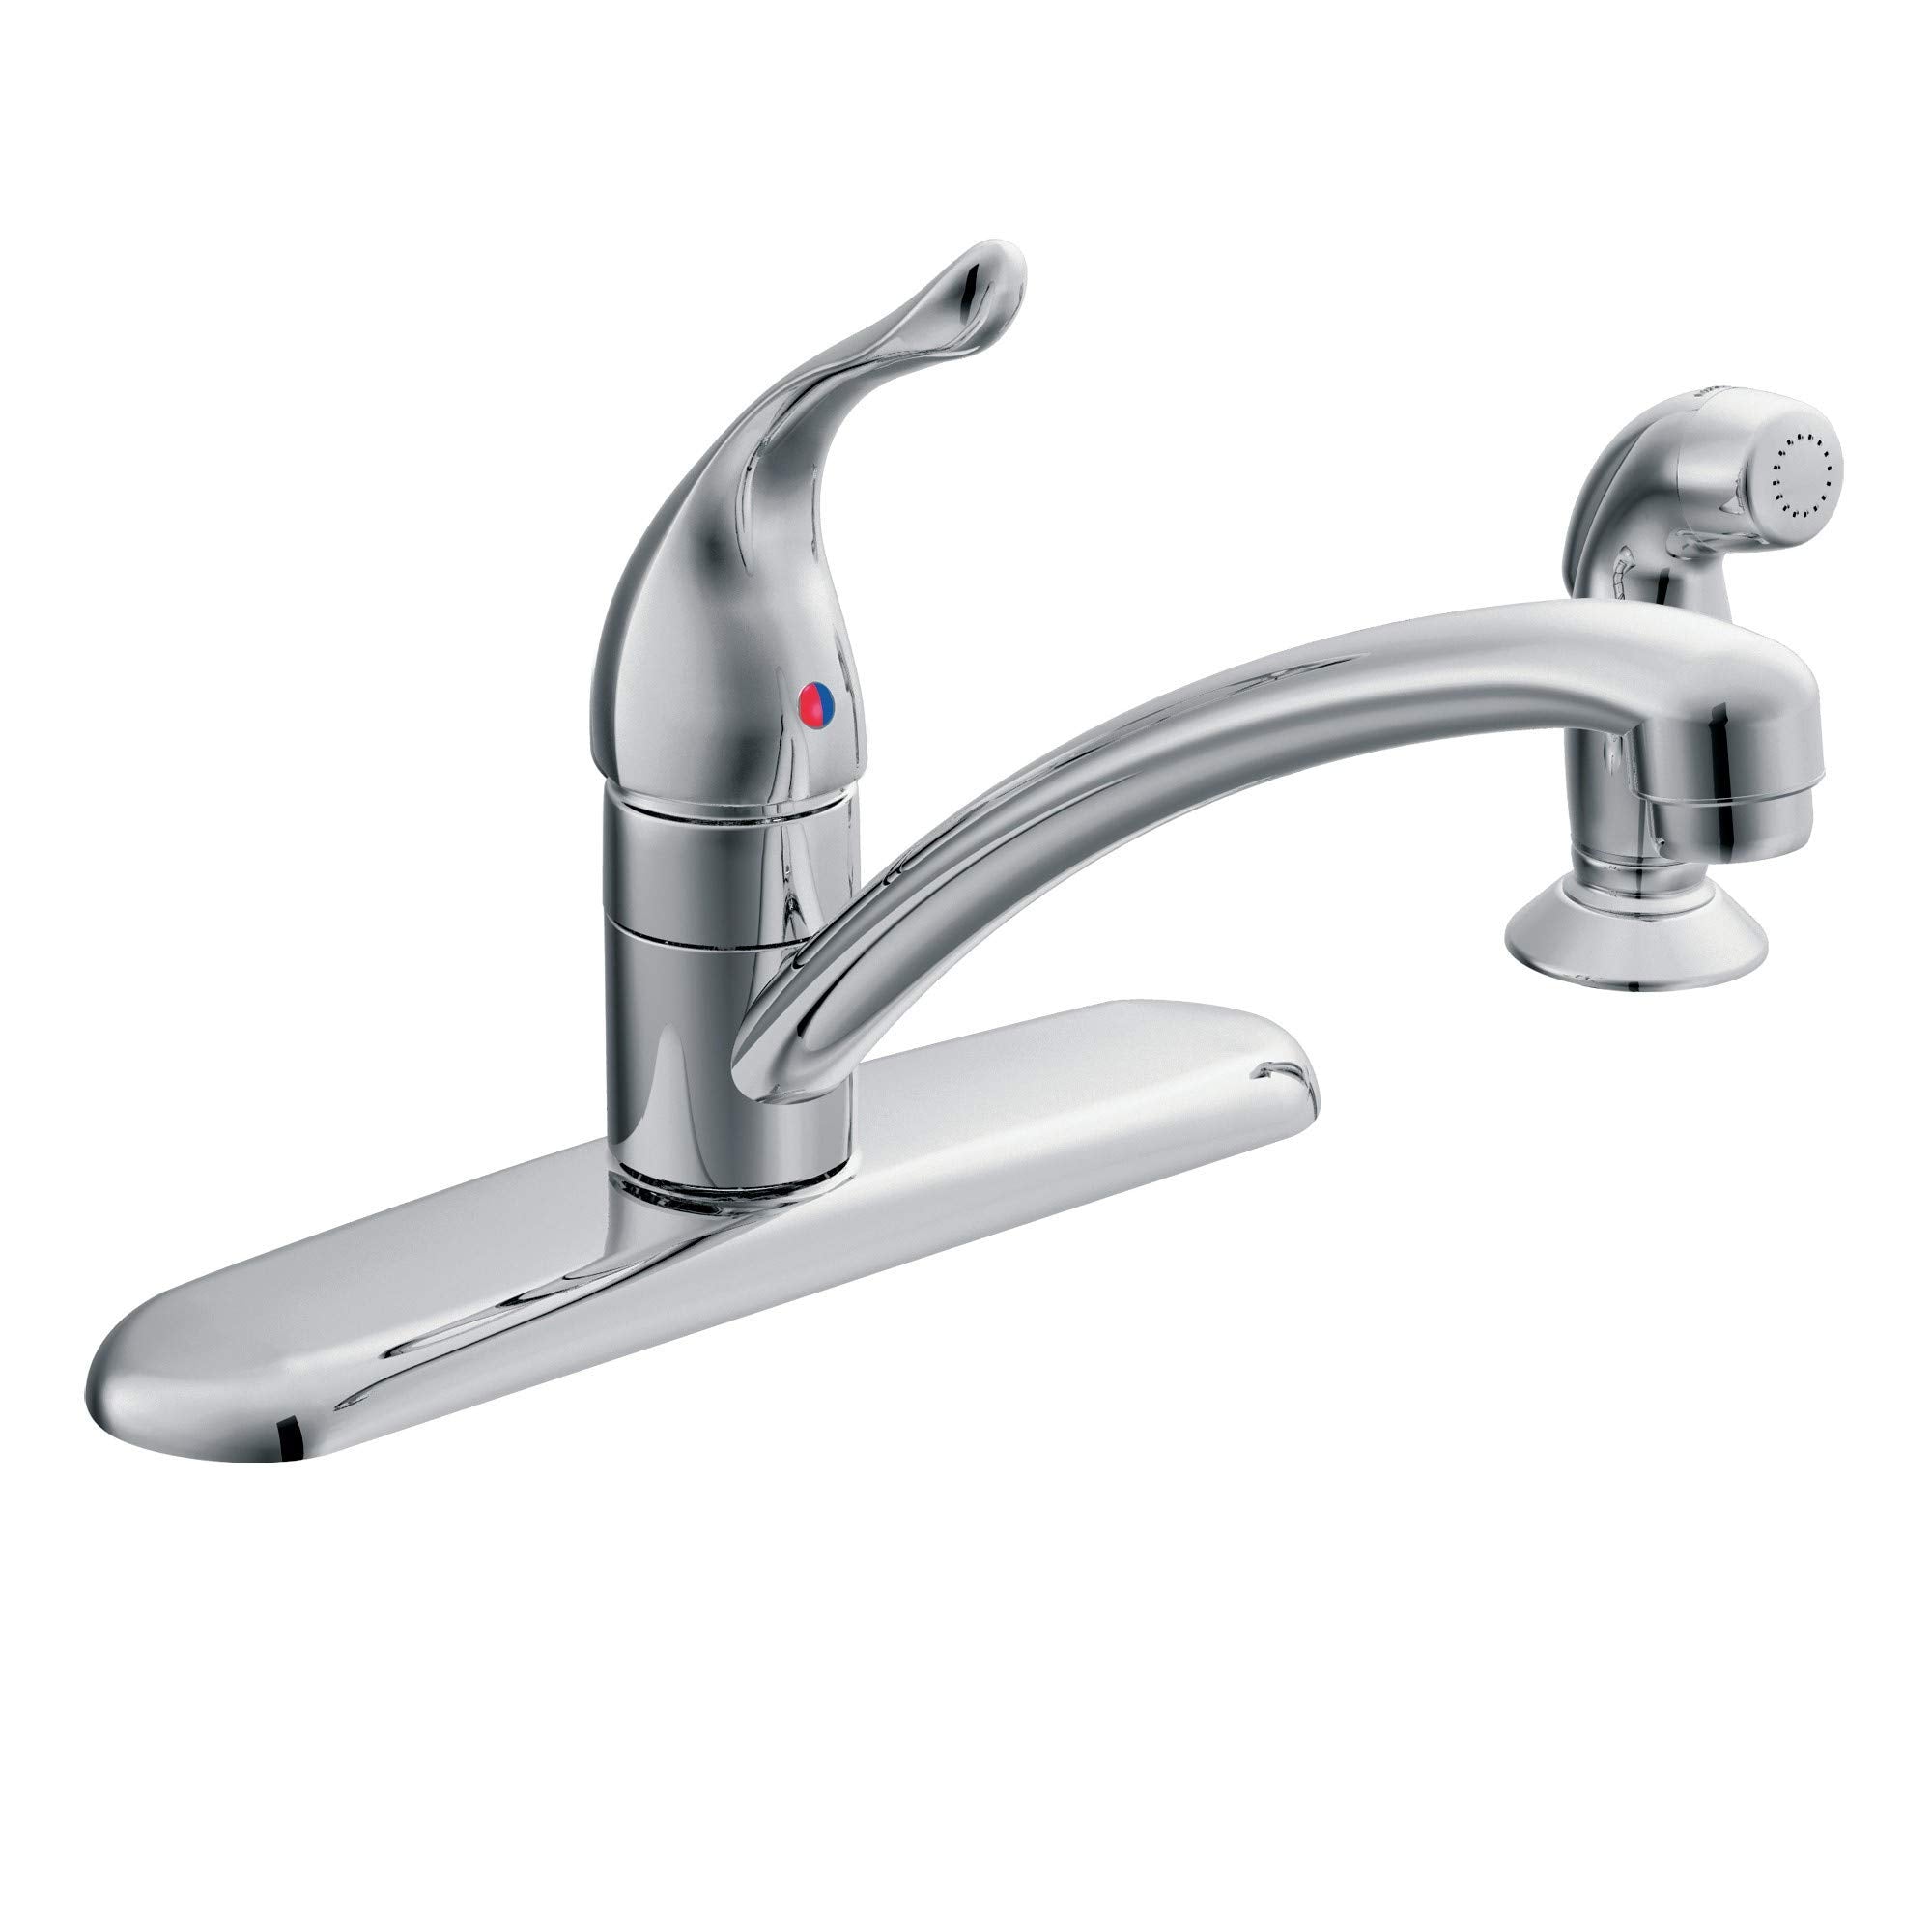 Moen 7430 Chateau One-Handle Low-Arc Kitchen Faucet with Side Sprayer, Chrome